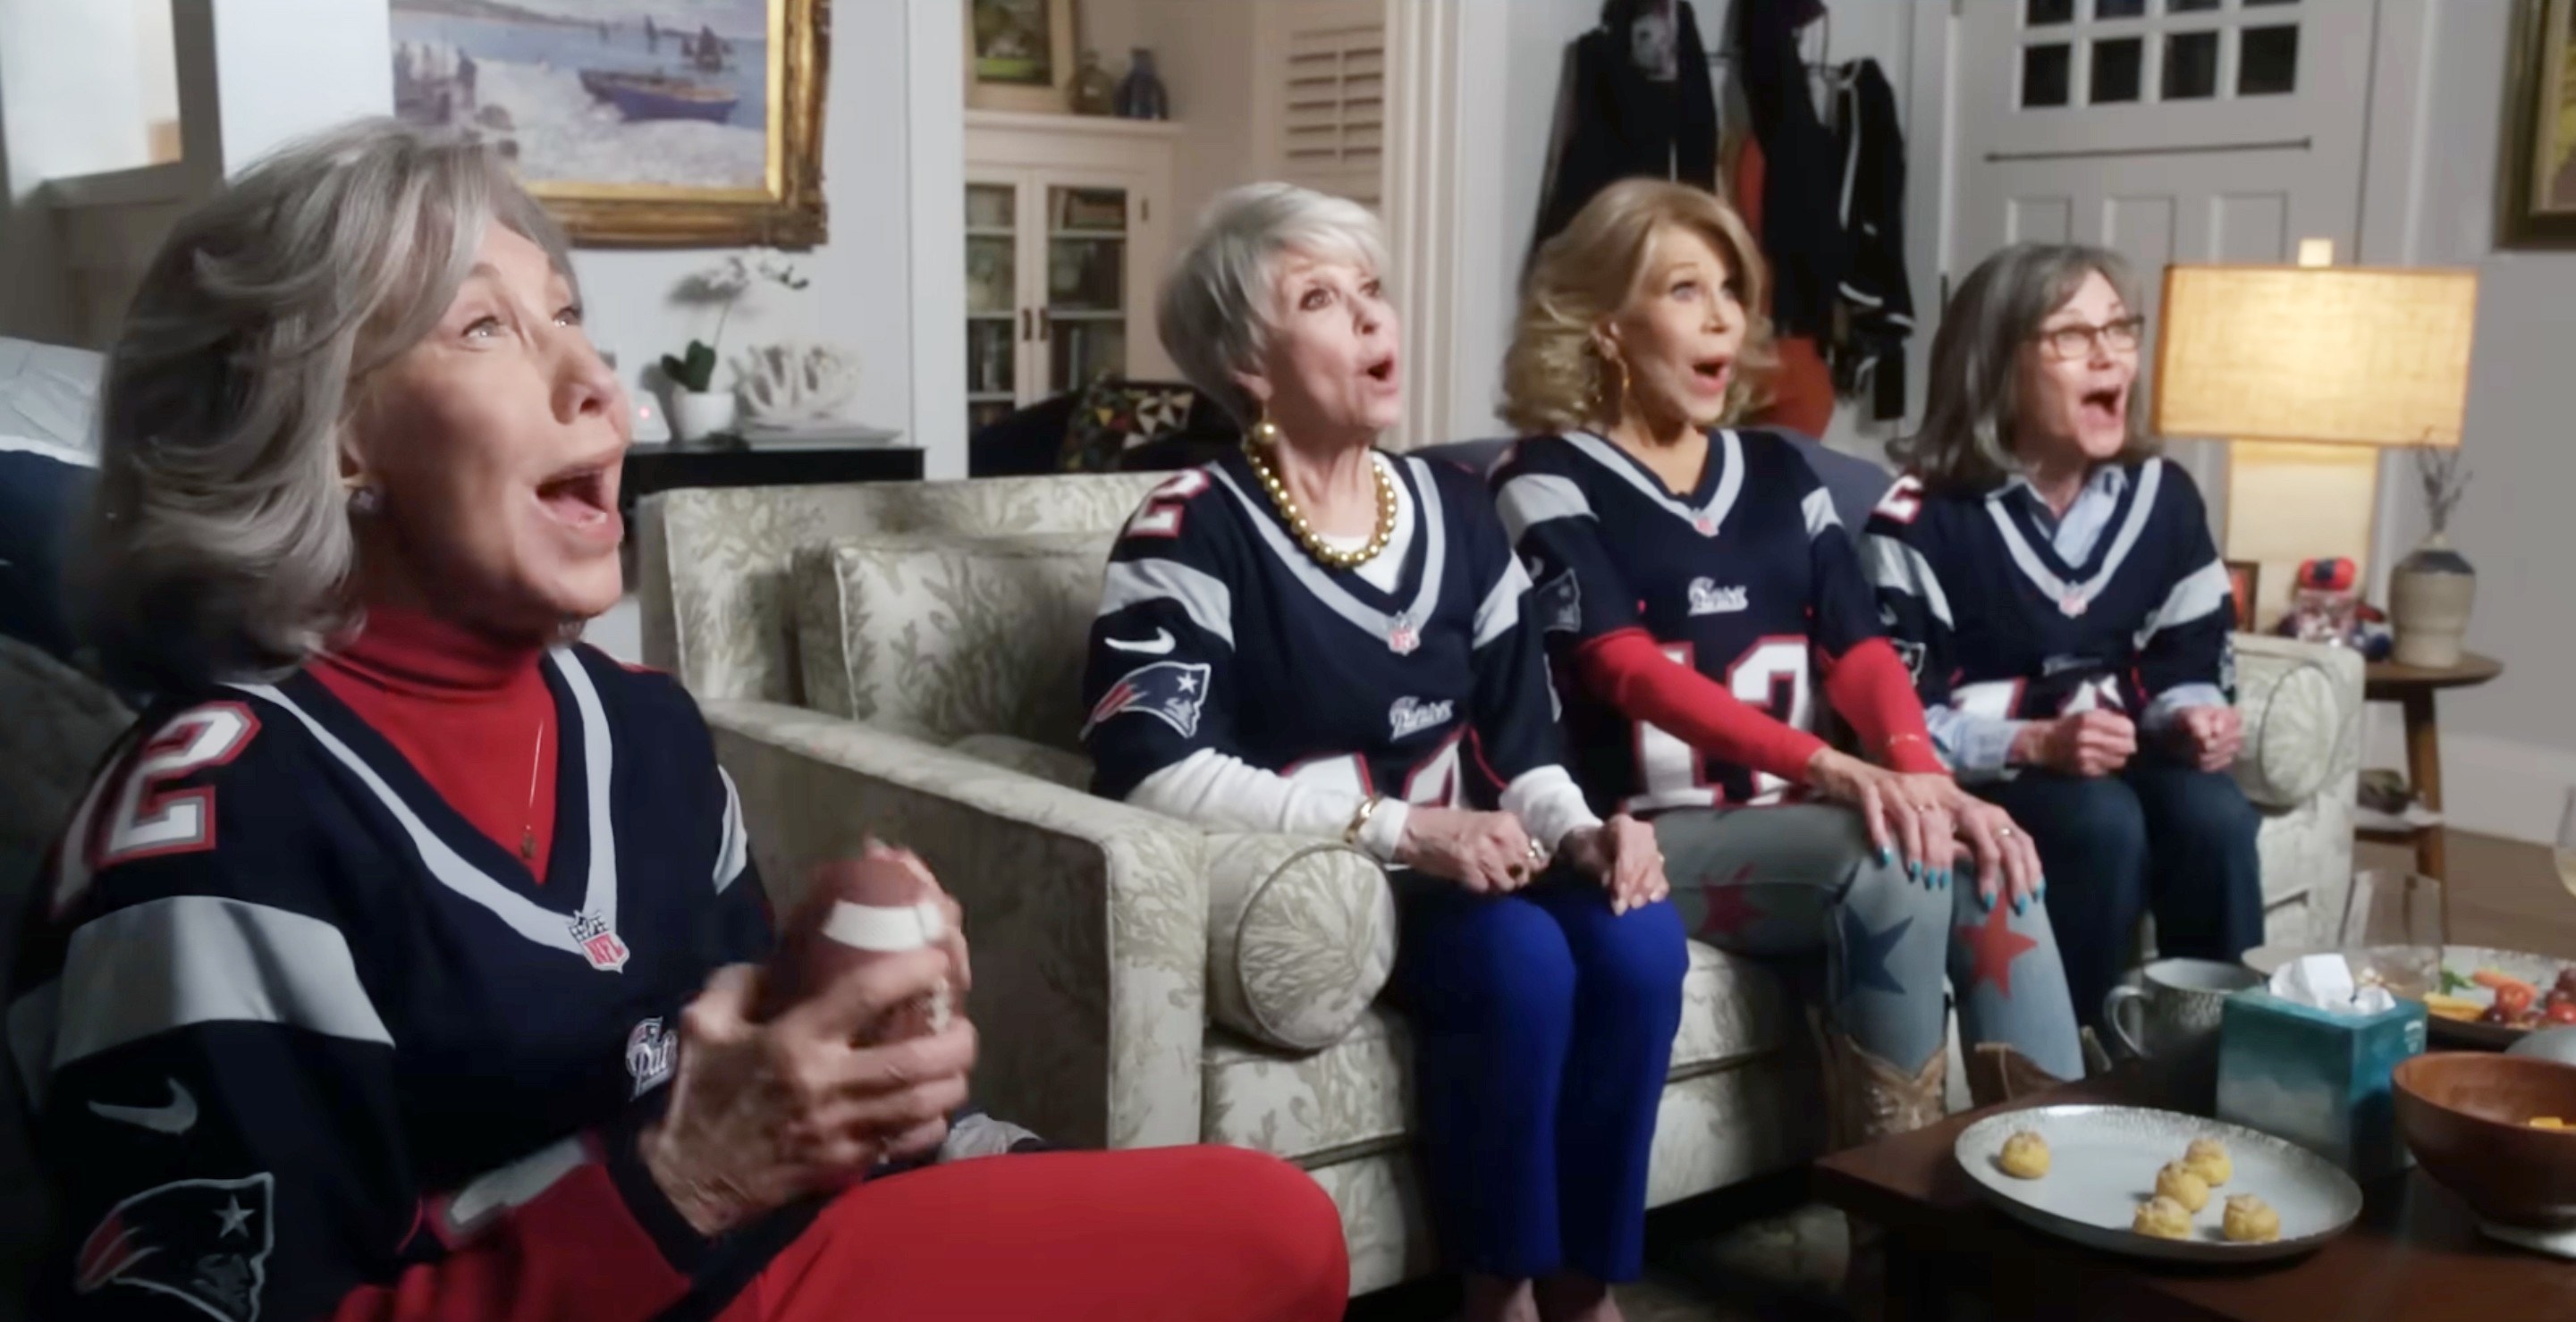 Lily, Rita, Jane, and Sally sit on the sofa at home watching the patriots